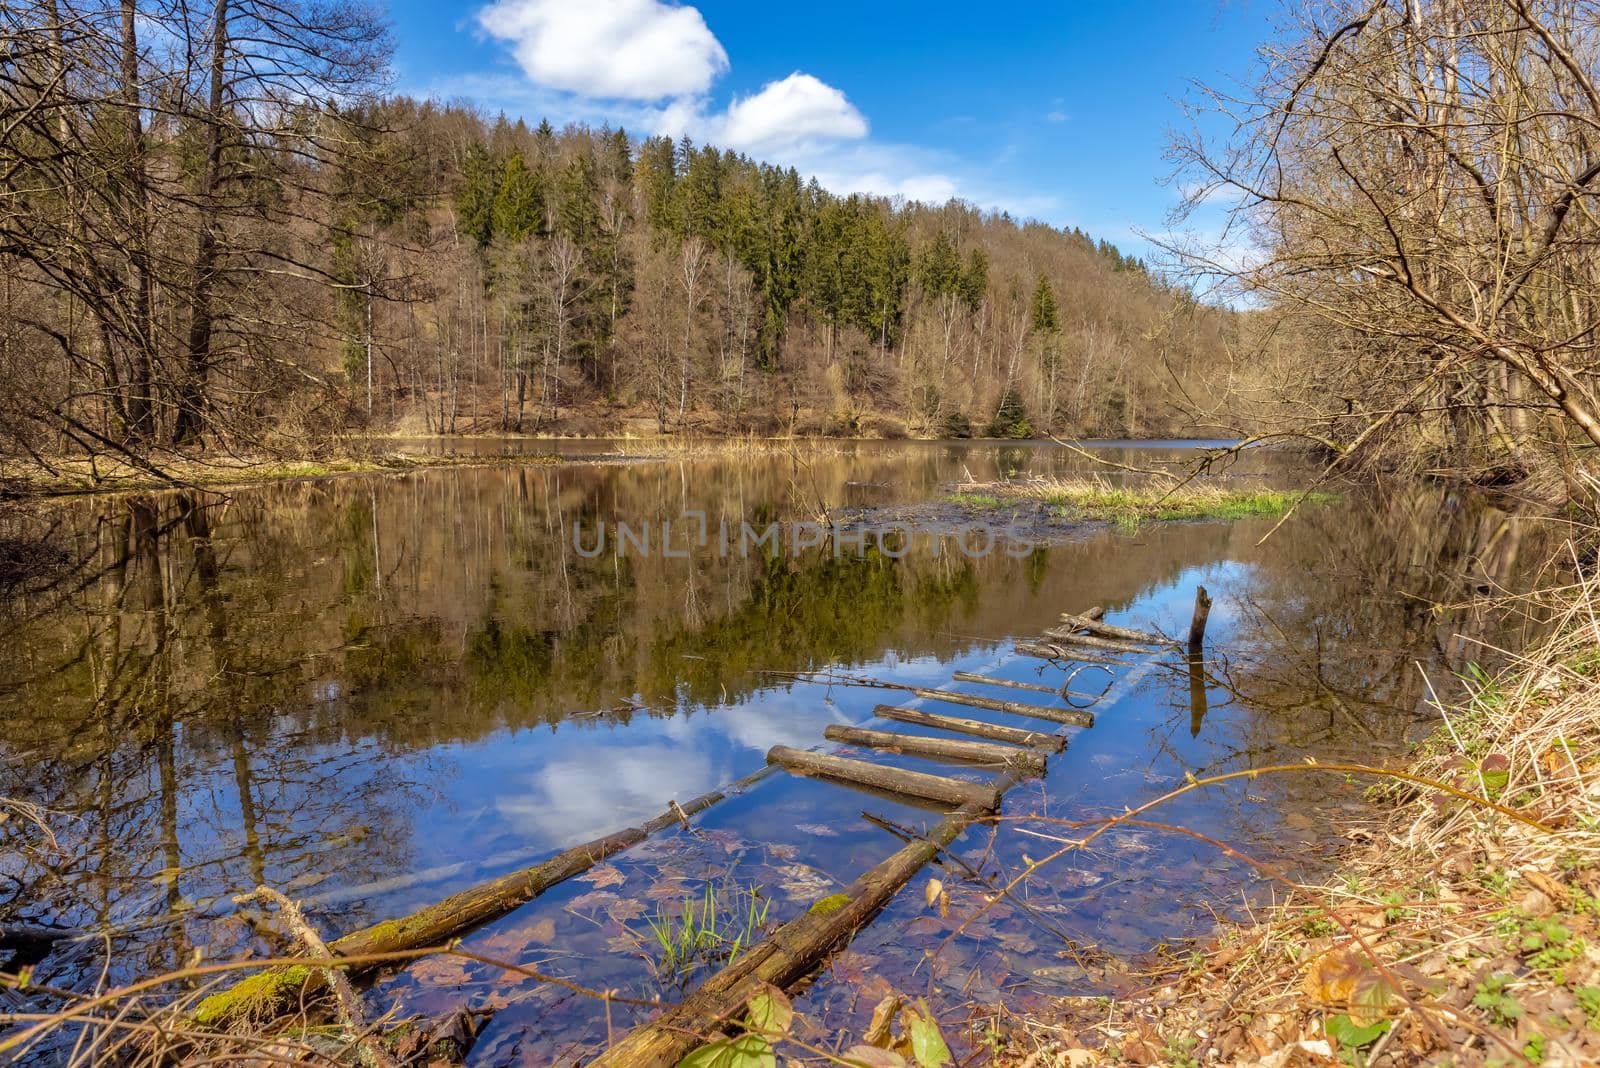 A spring day around burgk castle in the saaletal. Reflection of the sky, clouds, forest in the Saale river. In the foreground is a wooden staircase in the river. Germany, Thuringia.  by seka33